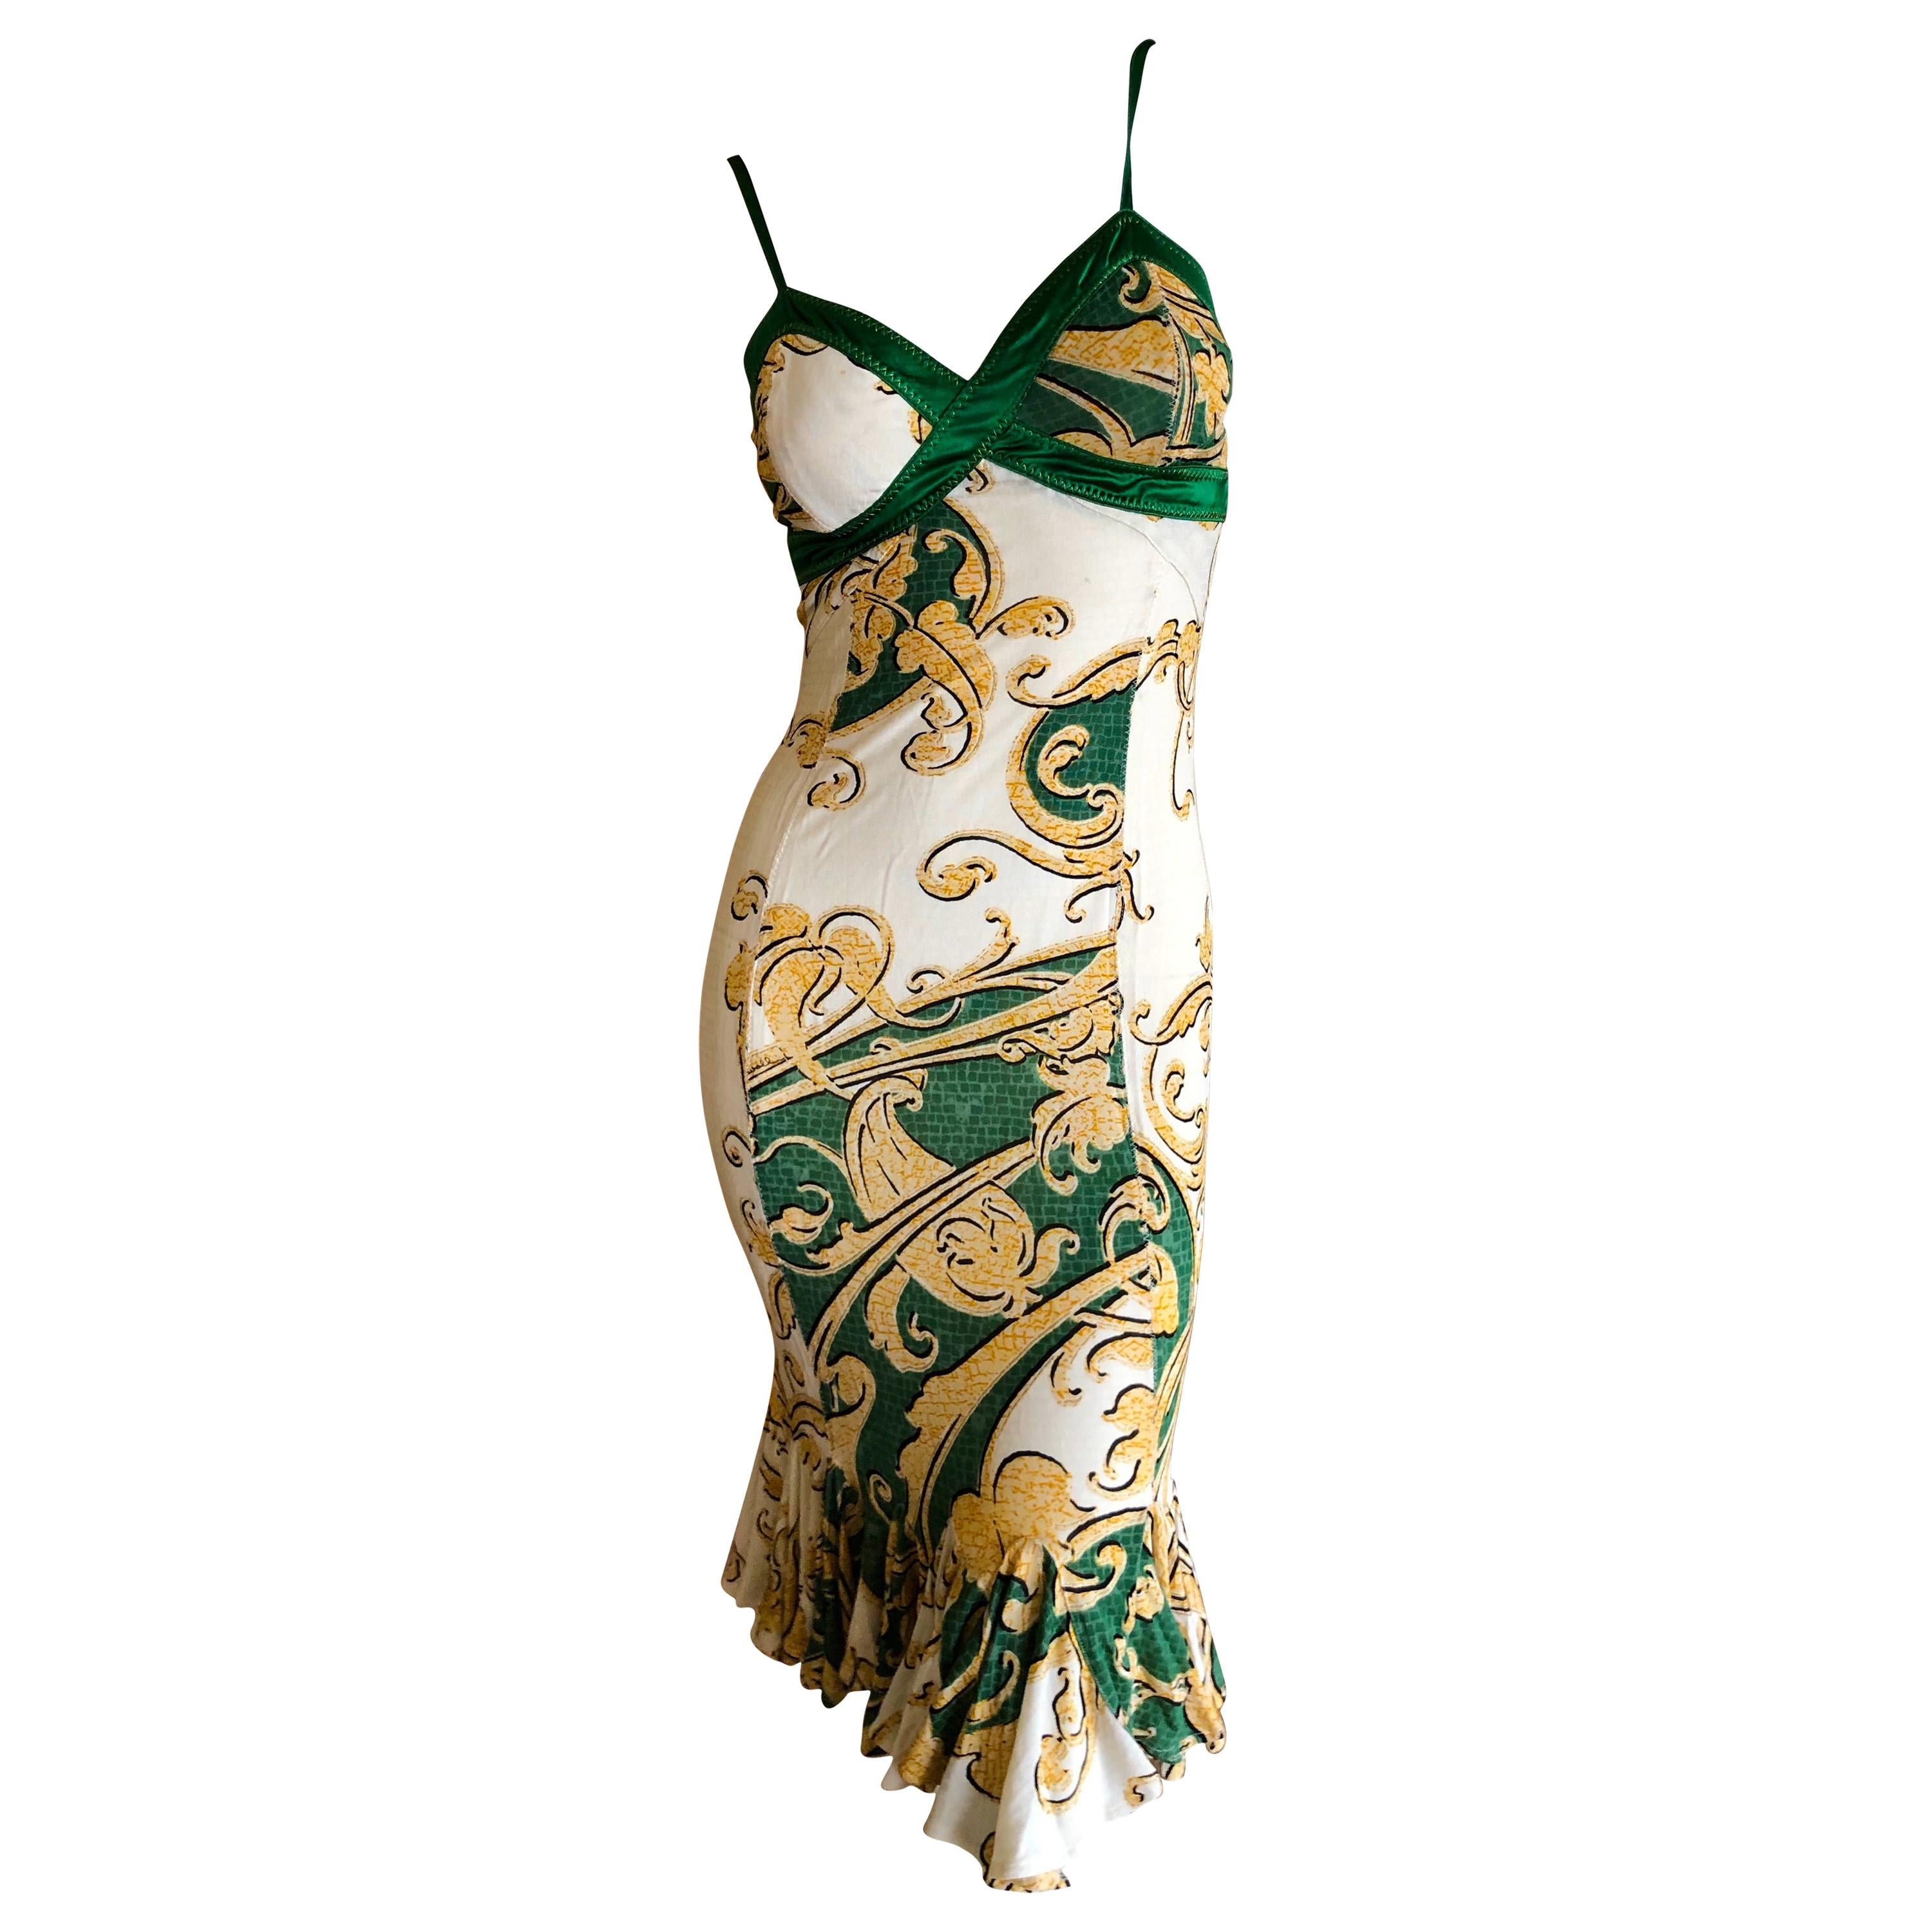 Roberto Cavalli for Just Cavalli Green and Gold Dress with Ruffle Flounce Hem For Sale